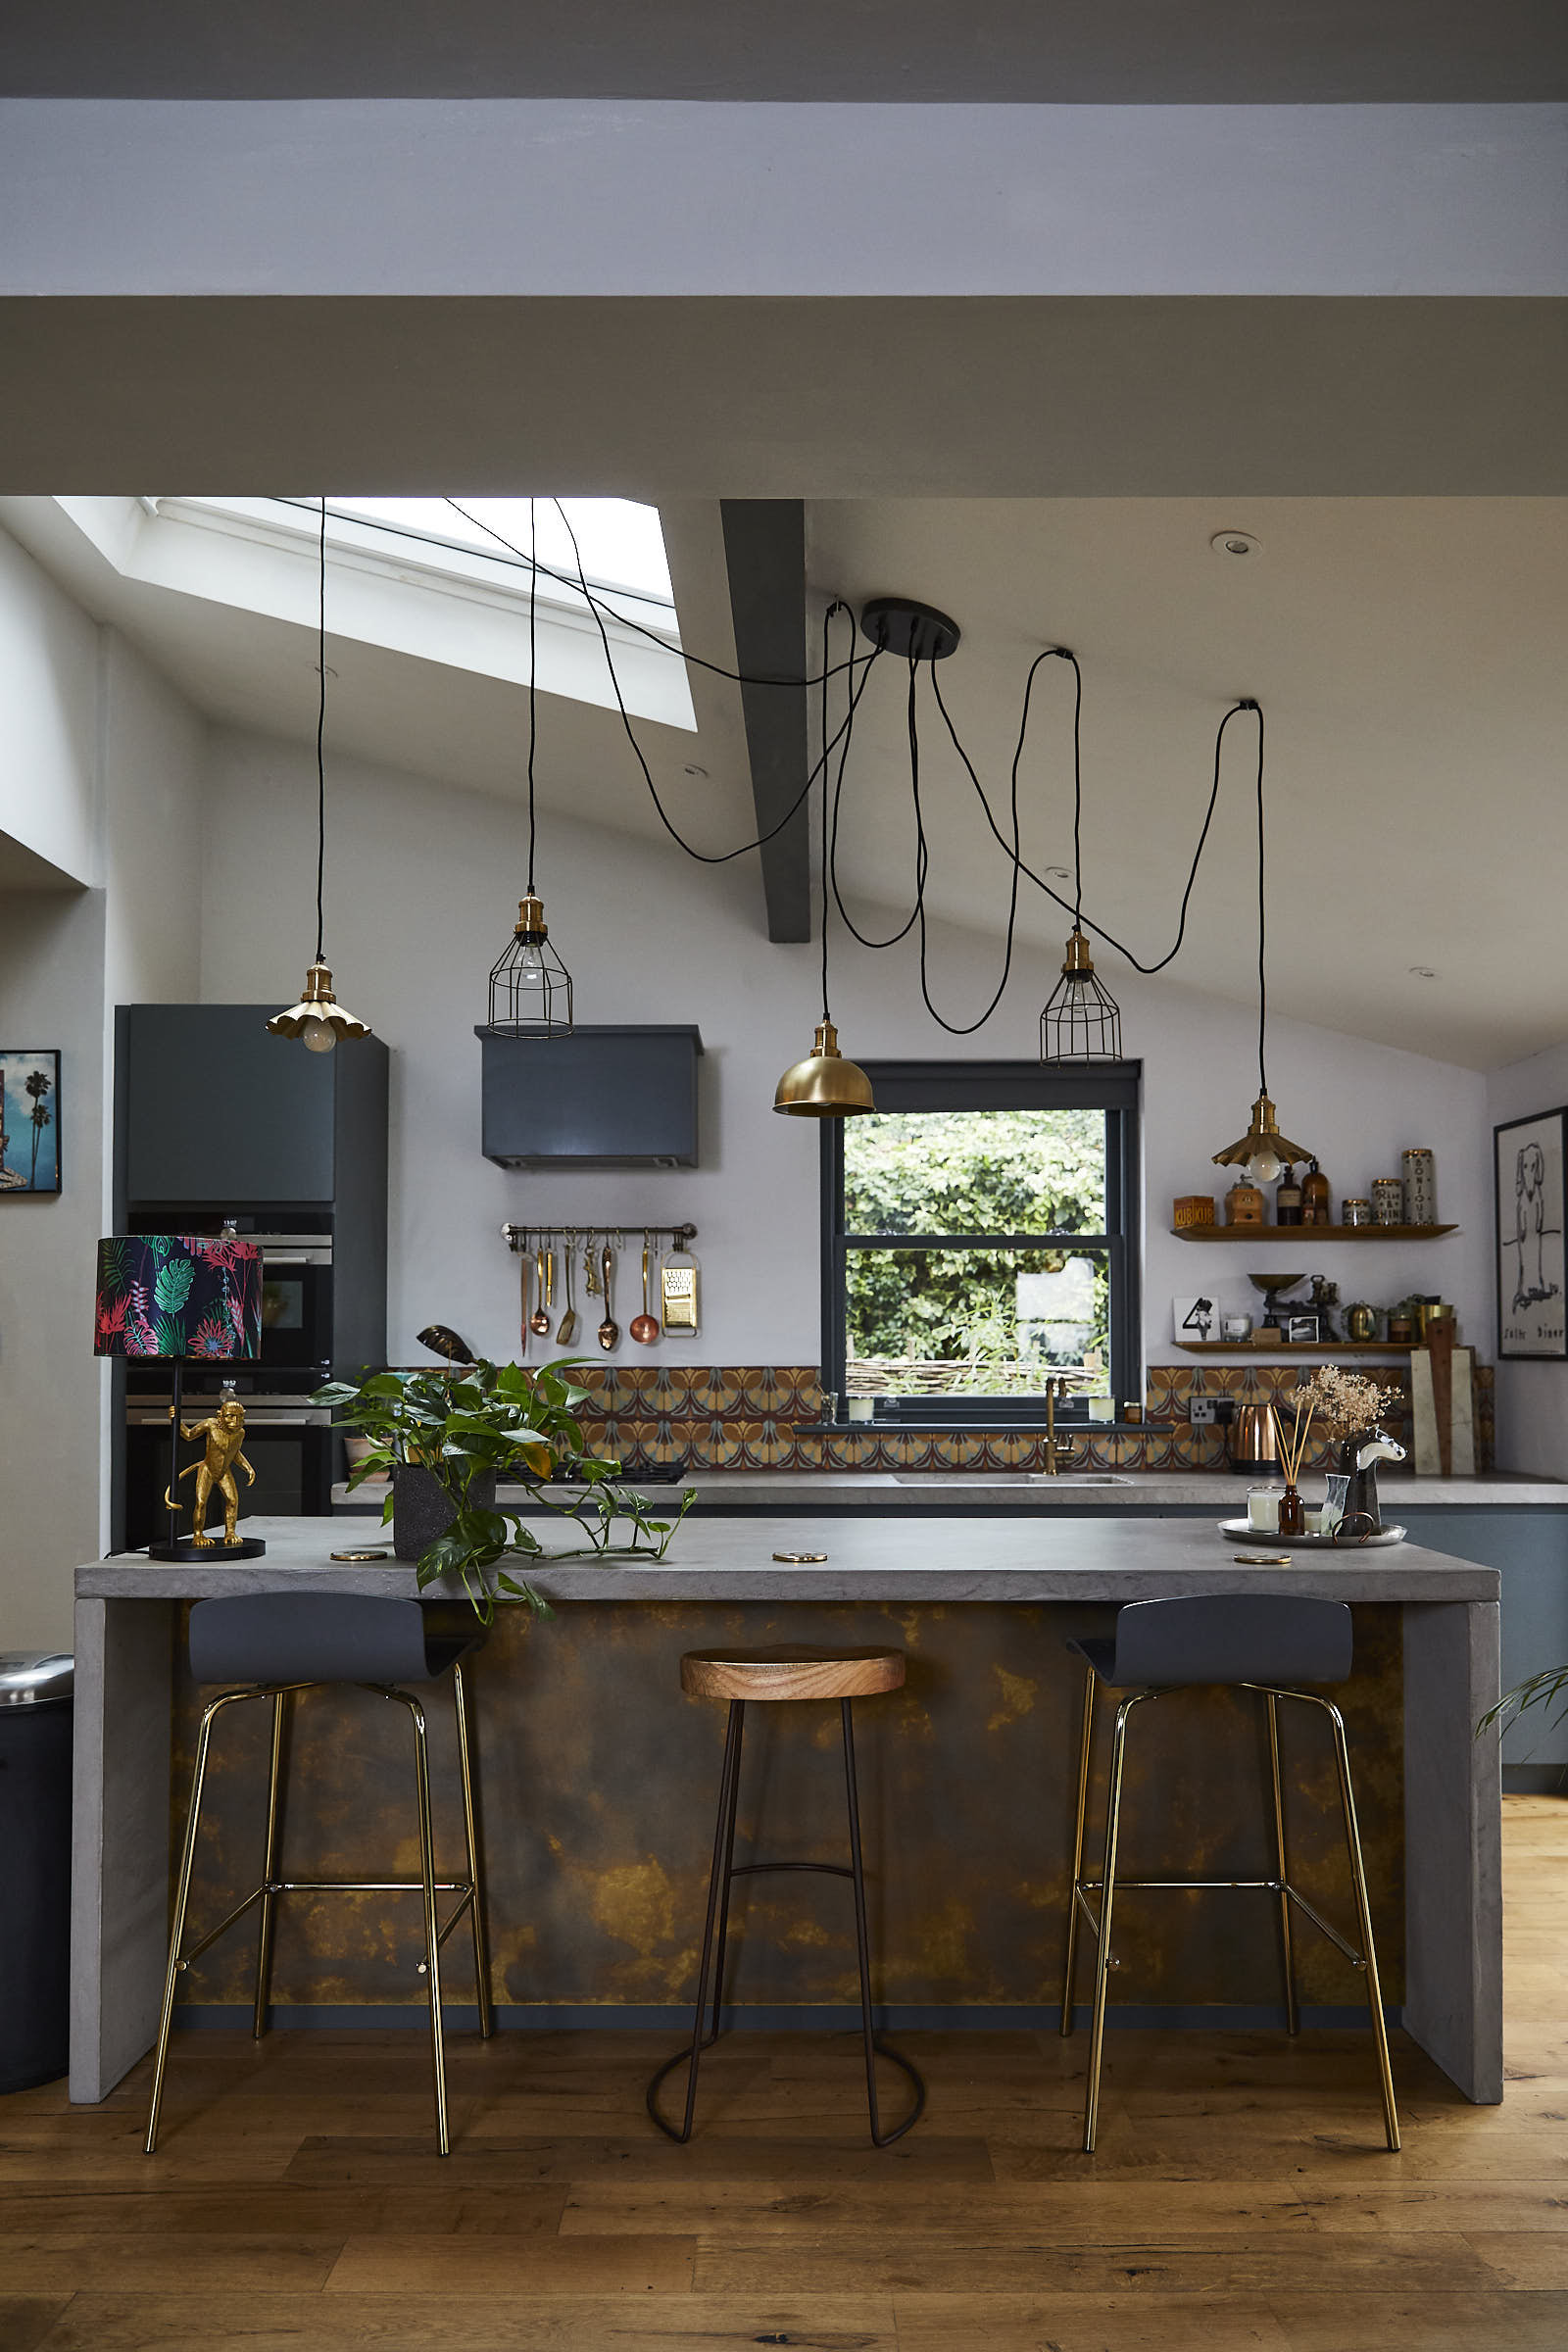 Stools under bespoke kitchen island made from concrete and brass with pendant lights hanging from above